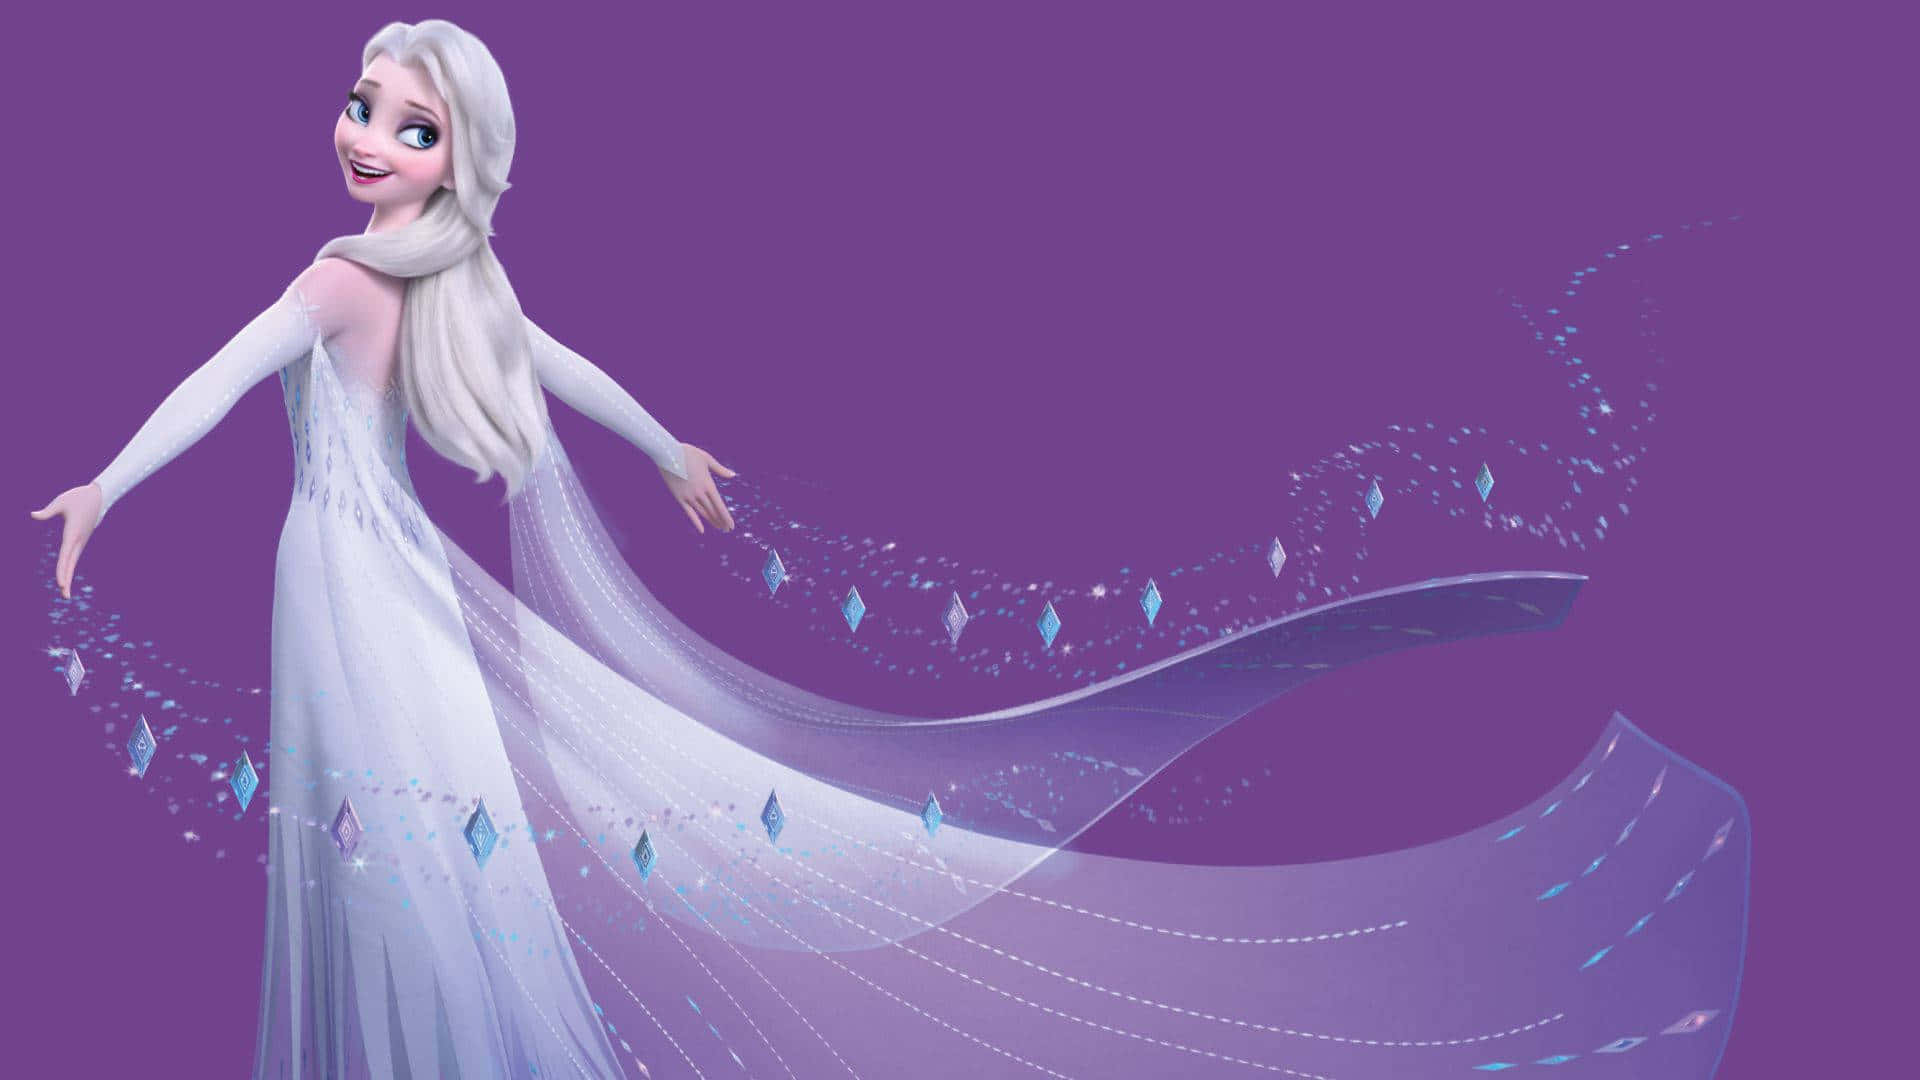 Download “Let it Go: Princess Elsa uses her magical powers to bring ...